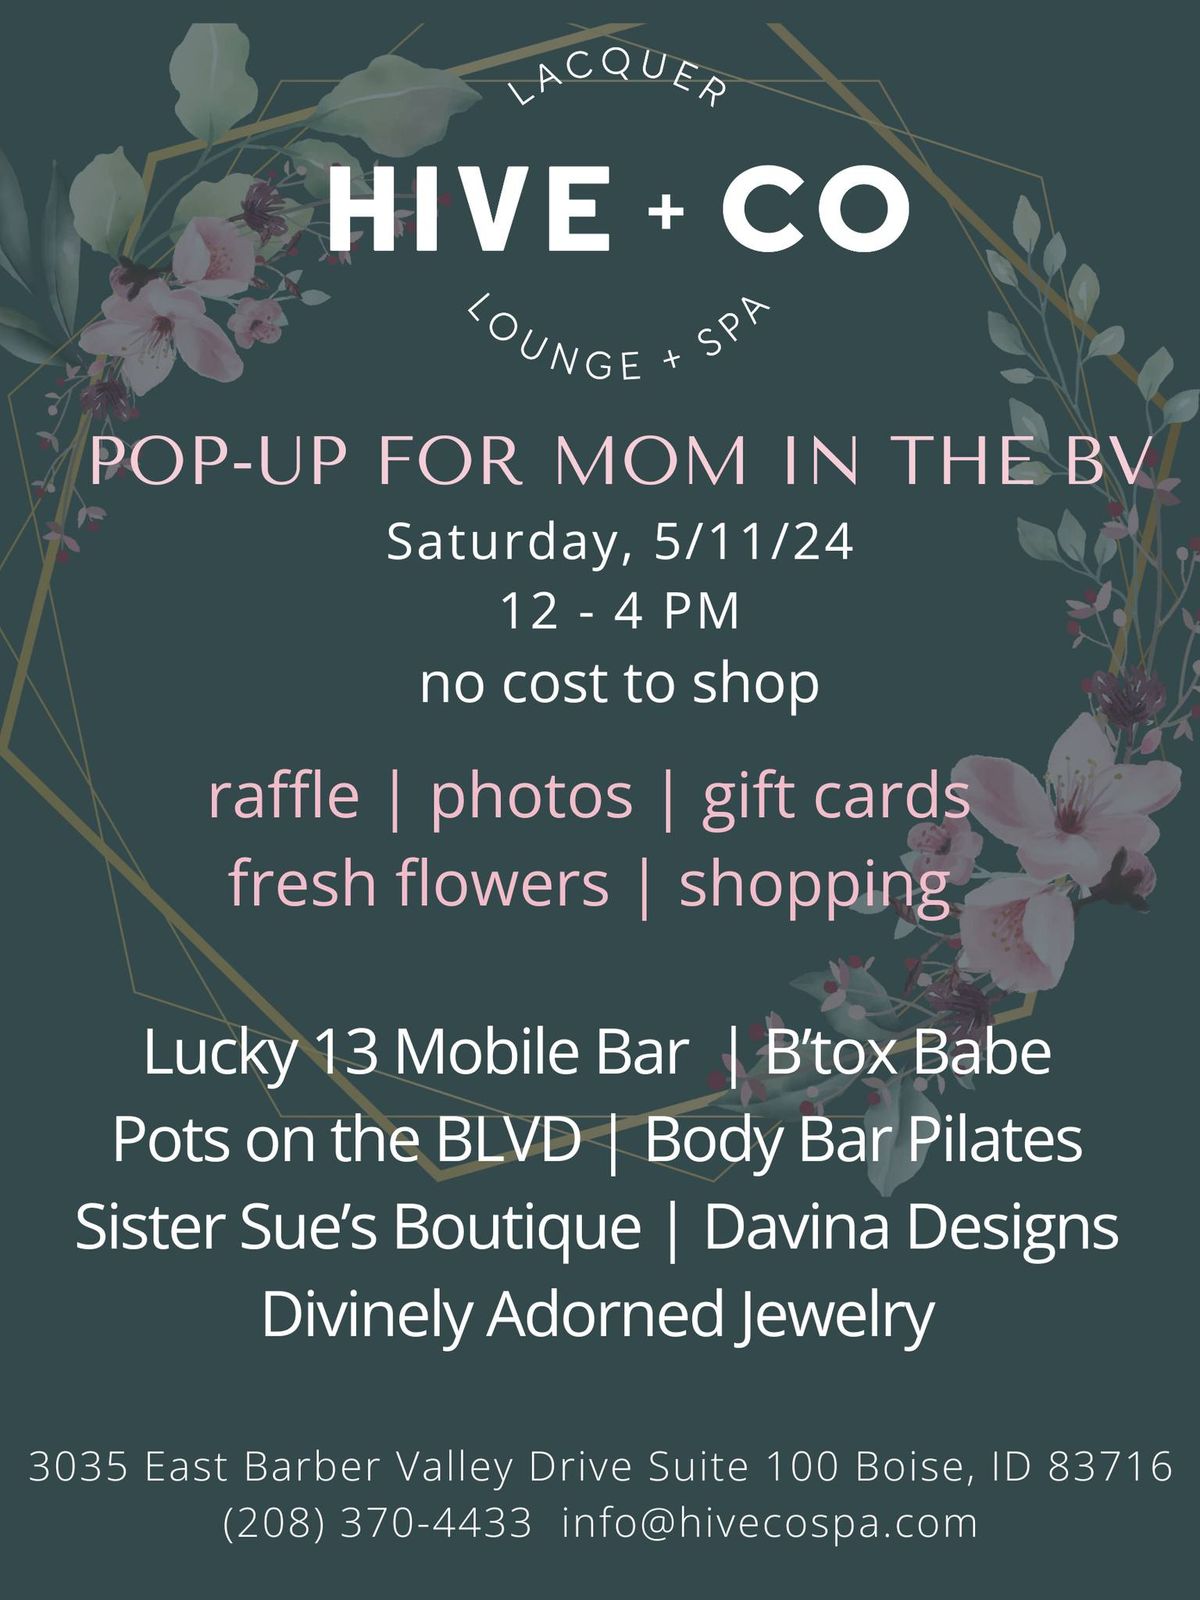 Pop-Up for Mom in the BV, Hosted by Hive + Co